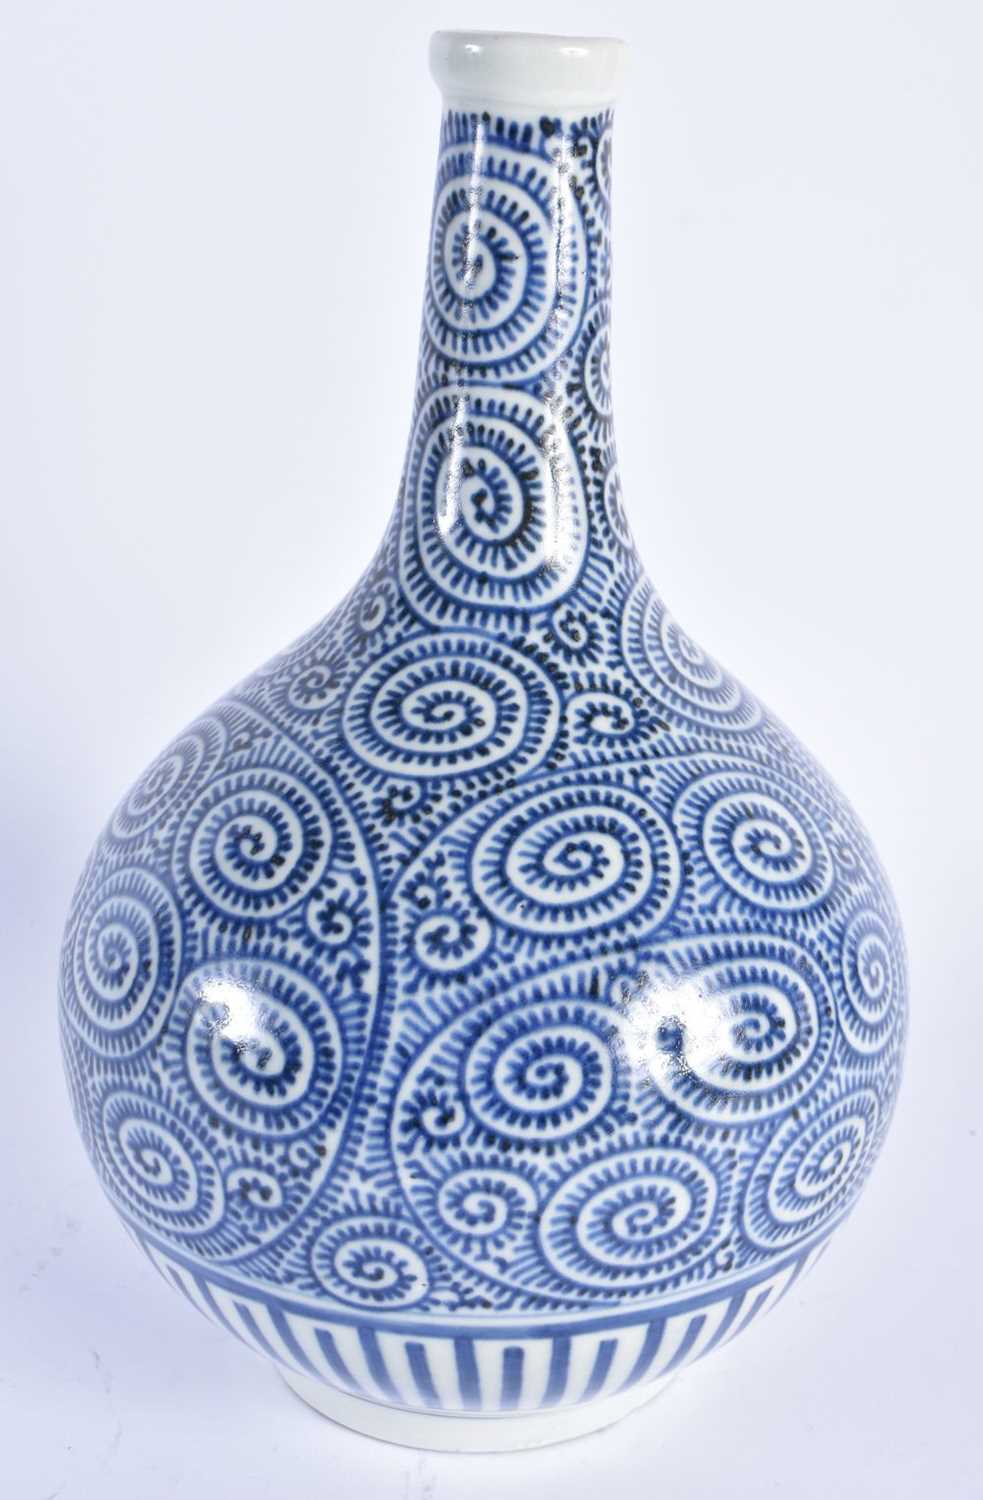 AN 18TH/19TH CENTURY JAPANESE EDO PERIOD BLUE AND WHITE BULBOUS PORCELAIN VASE painted with foliage. - Image 2 of 4